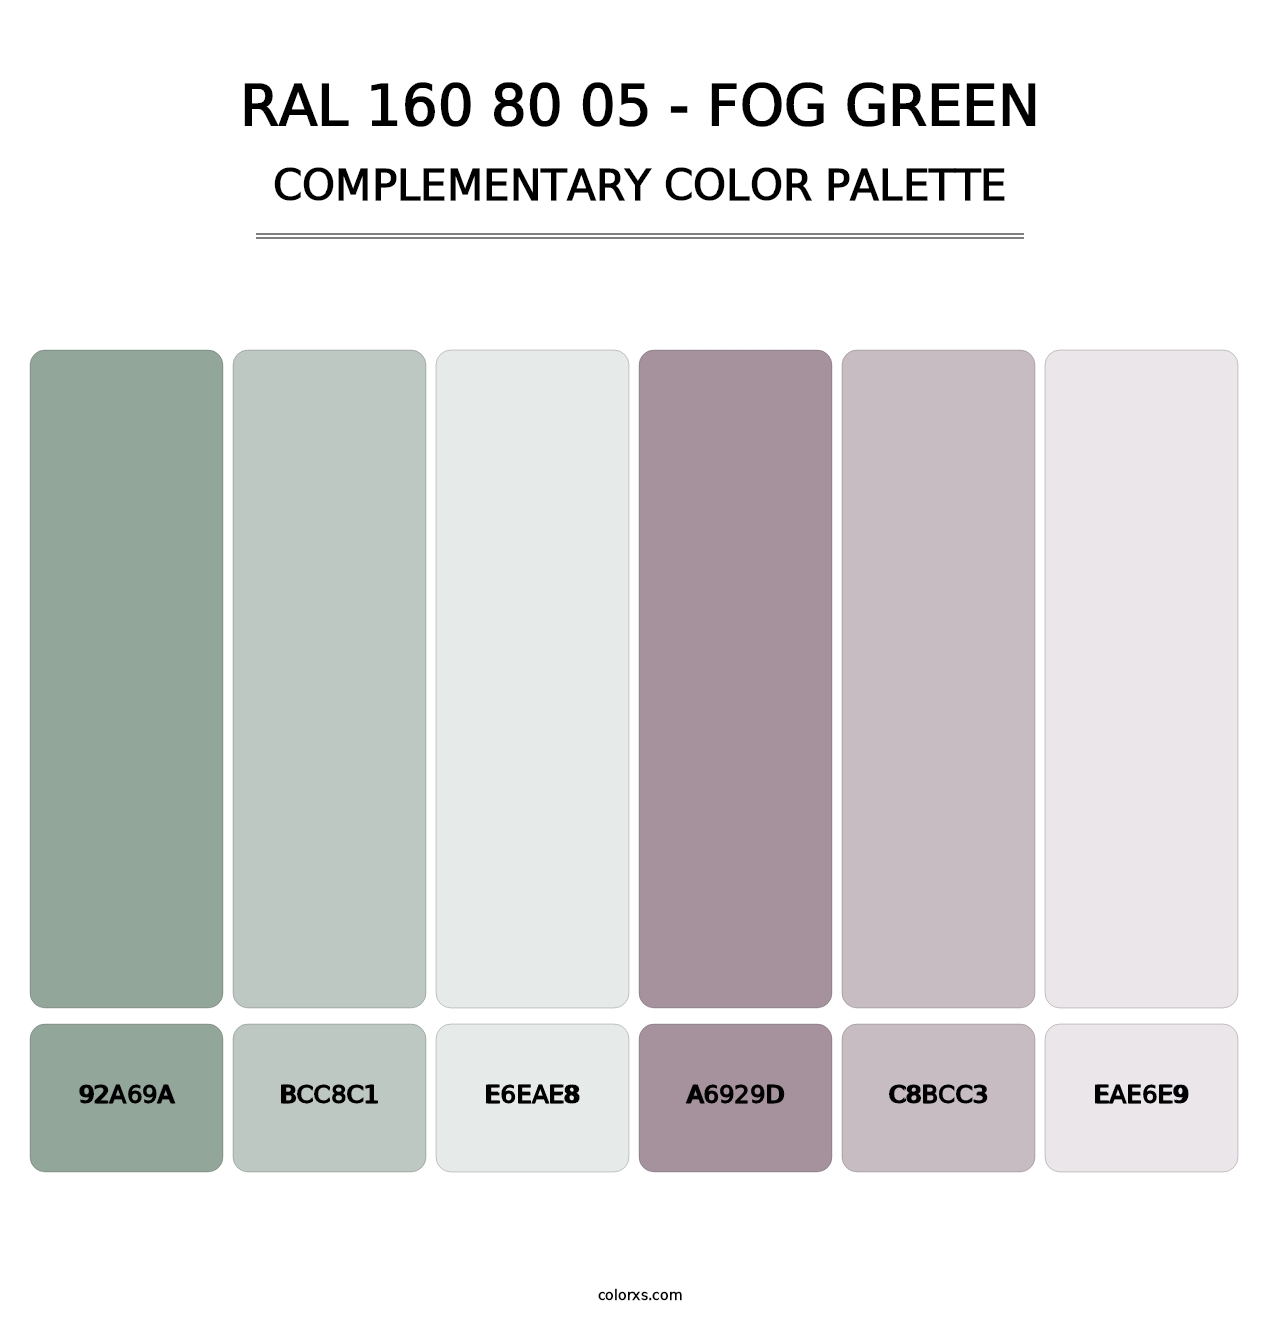 RAL 160 80 05 - Fog Green - Complementary Color Palette